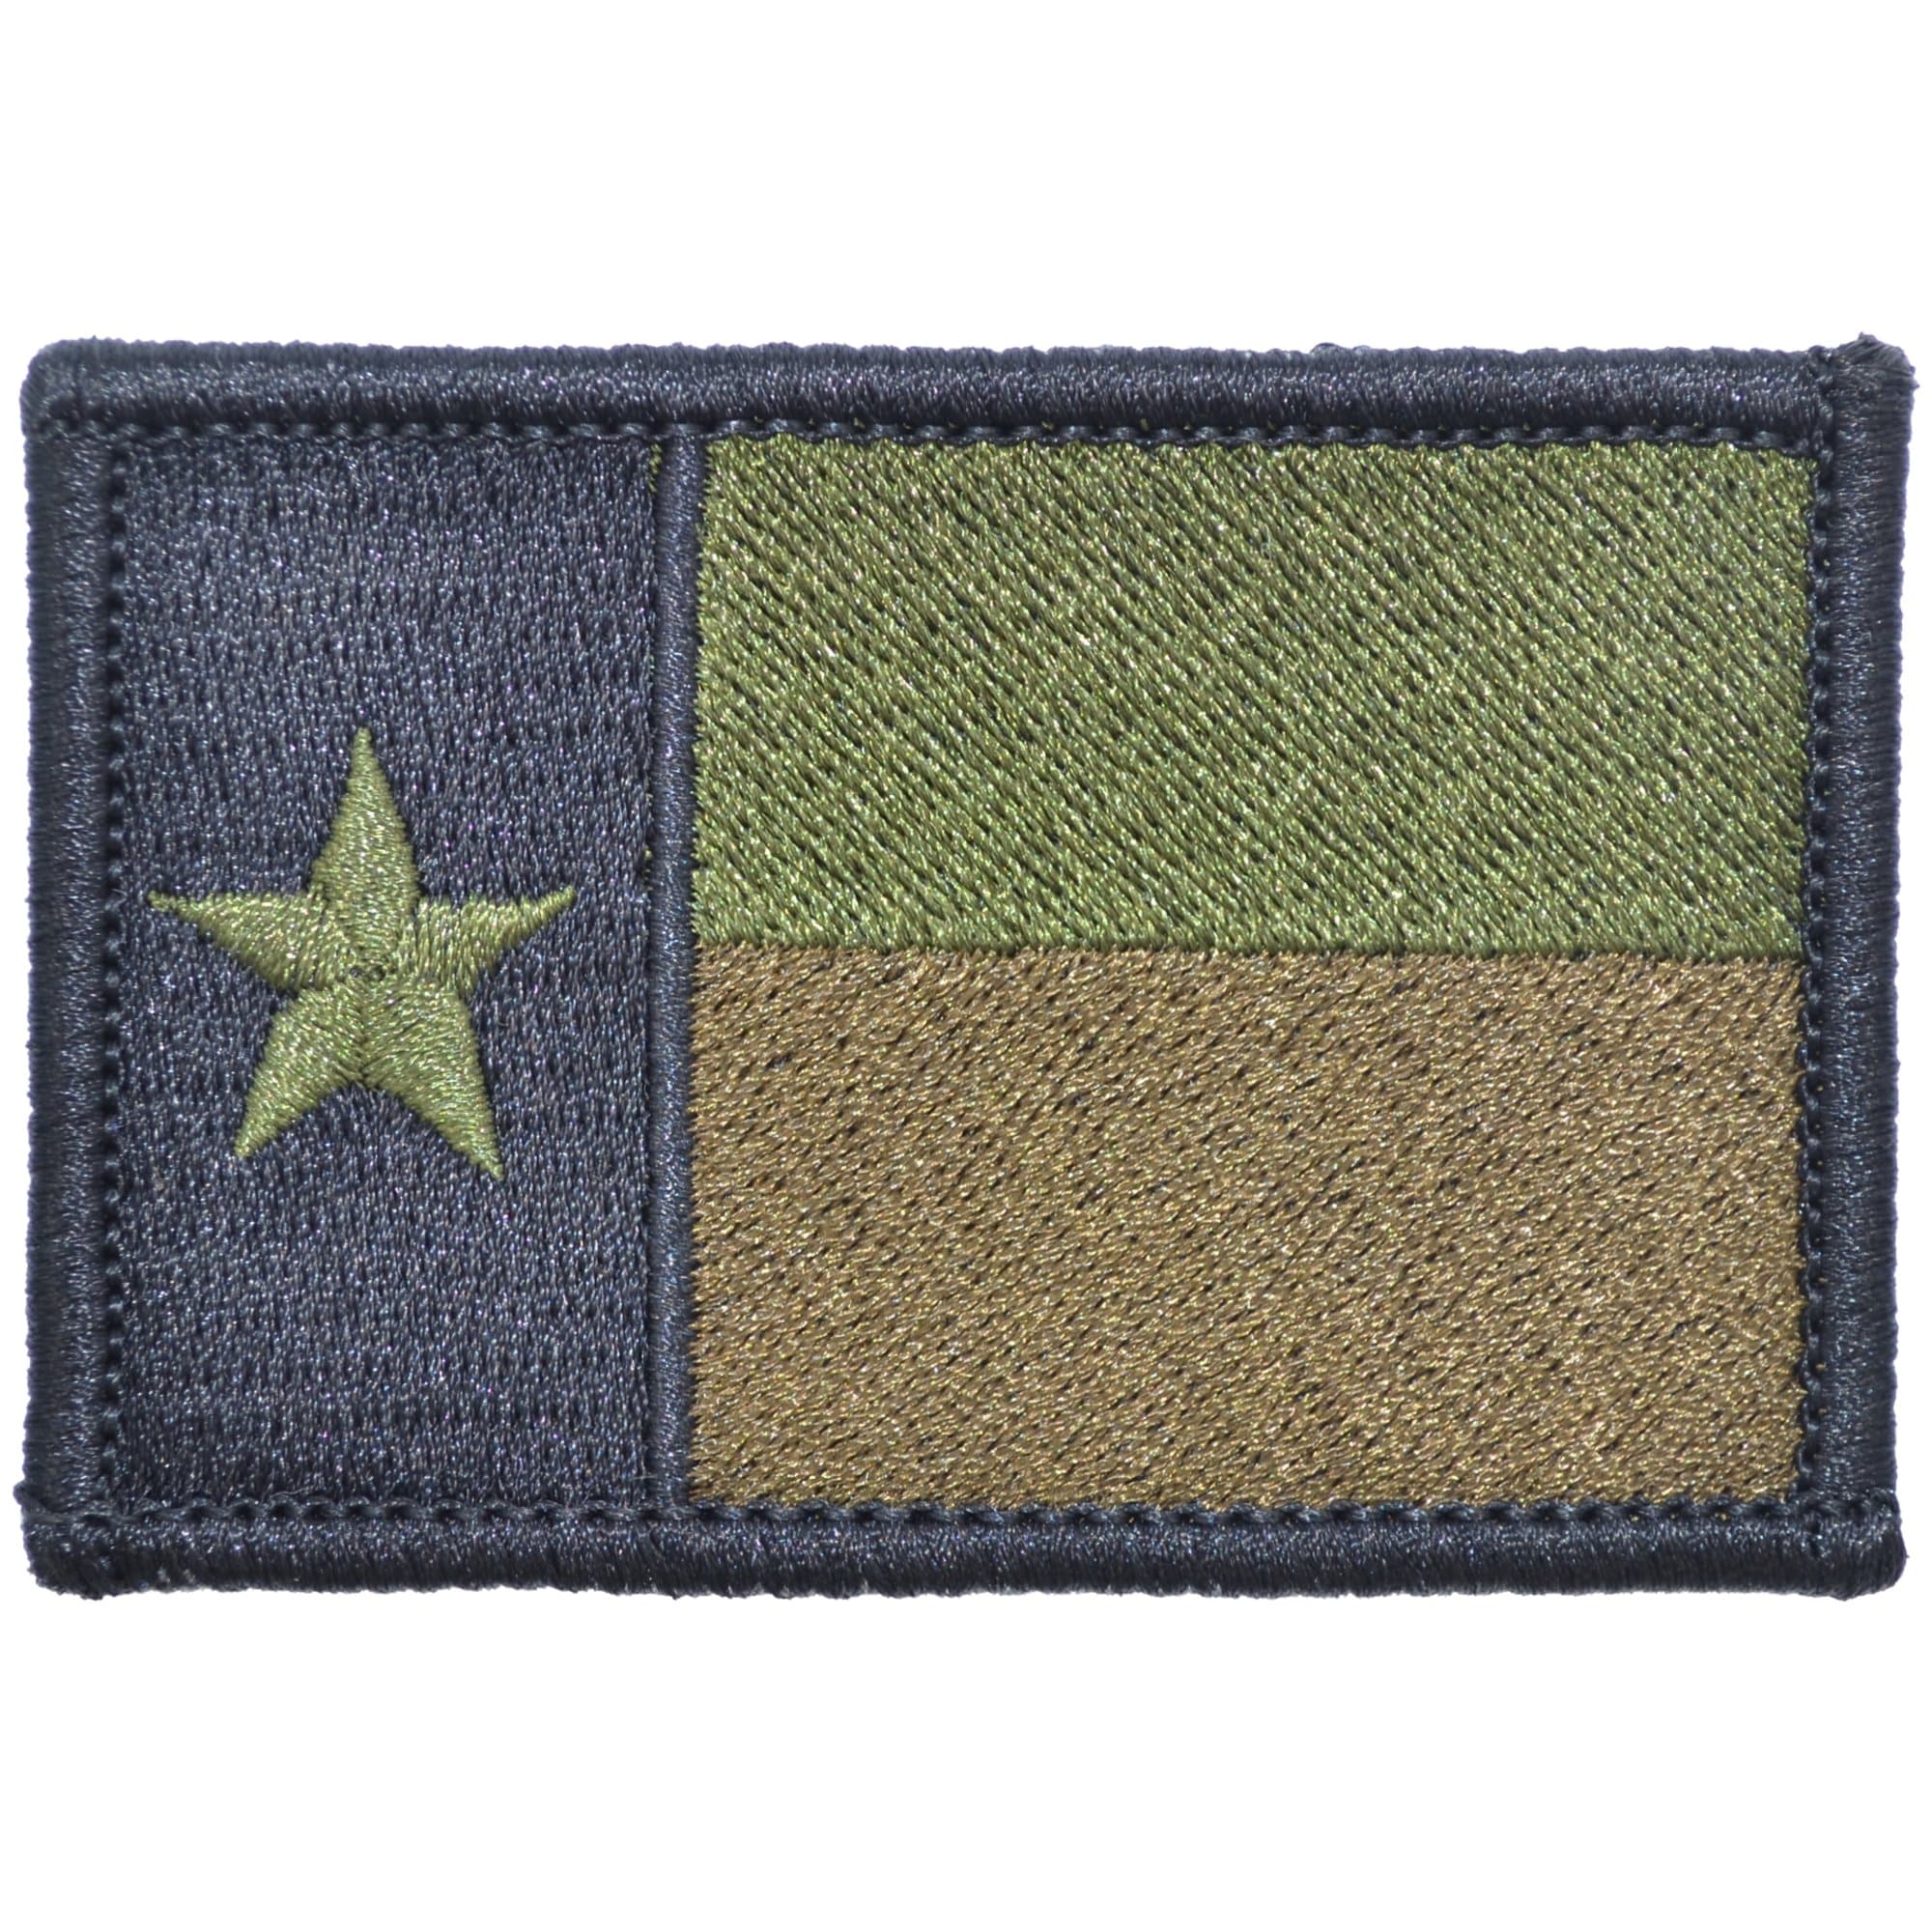 Tactical Gear Junkie Patches Olive Drab Texas State Flag - 2x3 Patch